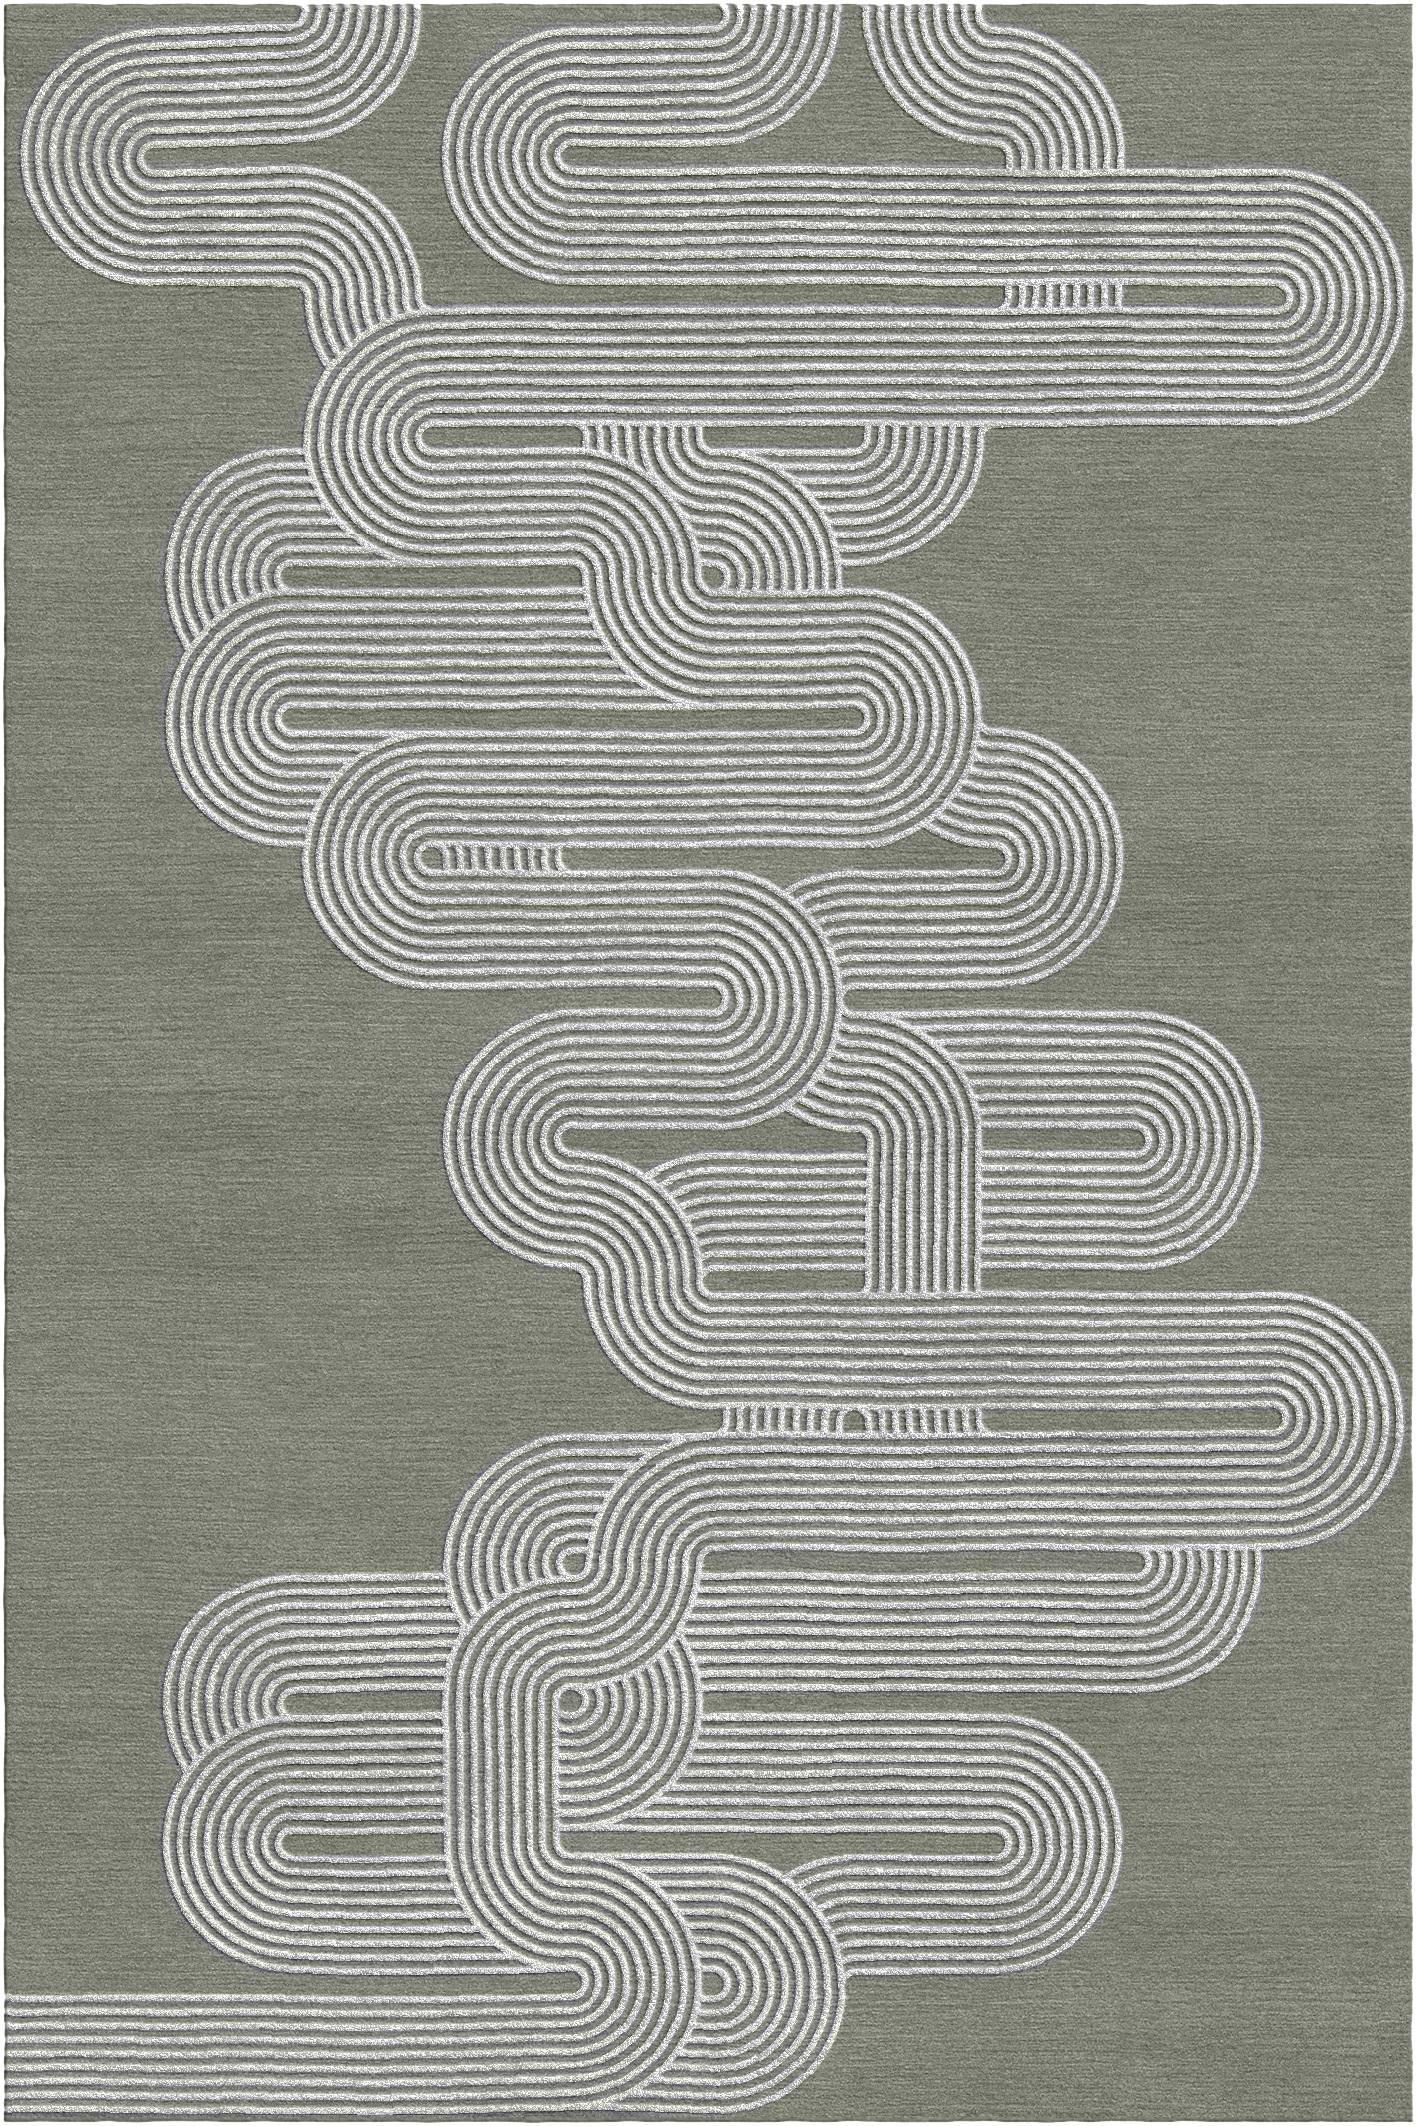 Curve rug III by Giulio Brambilla
Dimensions: D 300 x W 200 x H 1.5 cm
Materials: NZ wool, bamboo silk
Available in other colors.

A striking design of strong visual impact by artist and architect Giulio Brambilla, this rug will make a